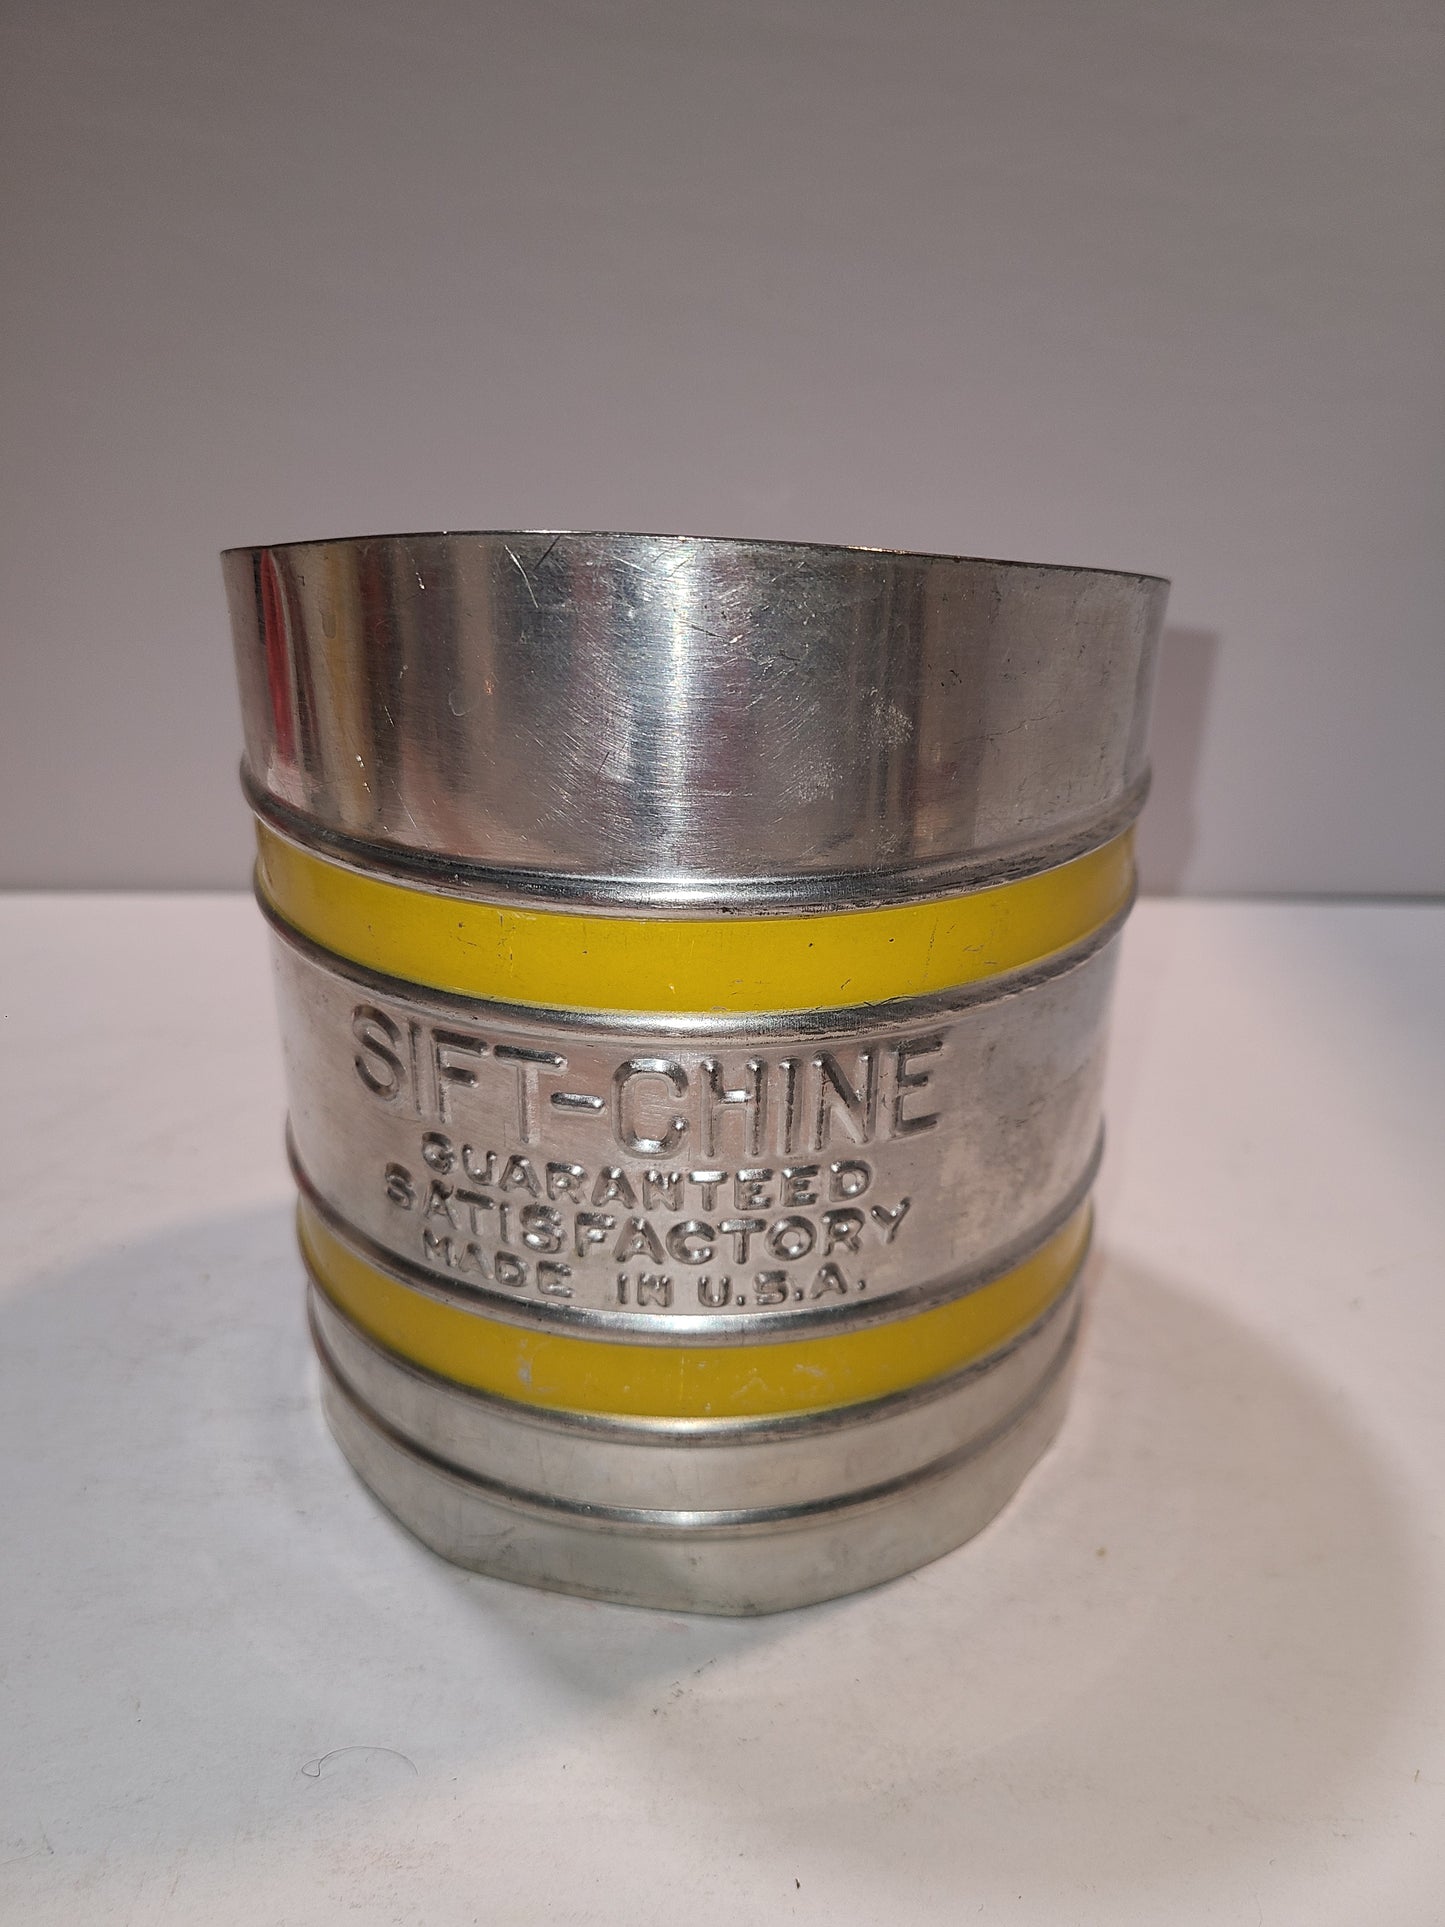 Vintage flour sifter Sift-Chine